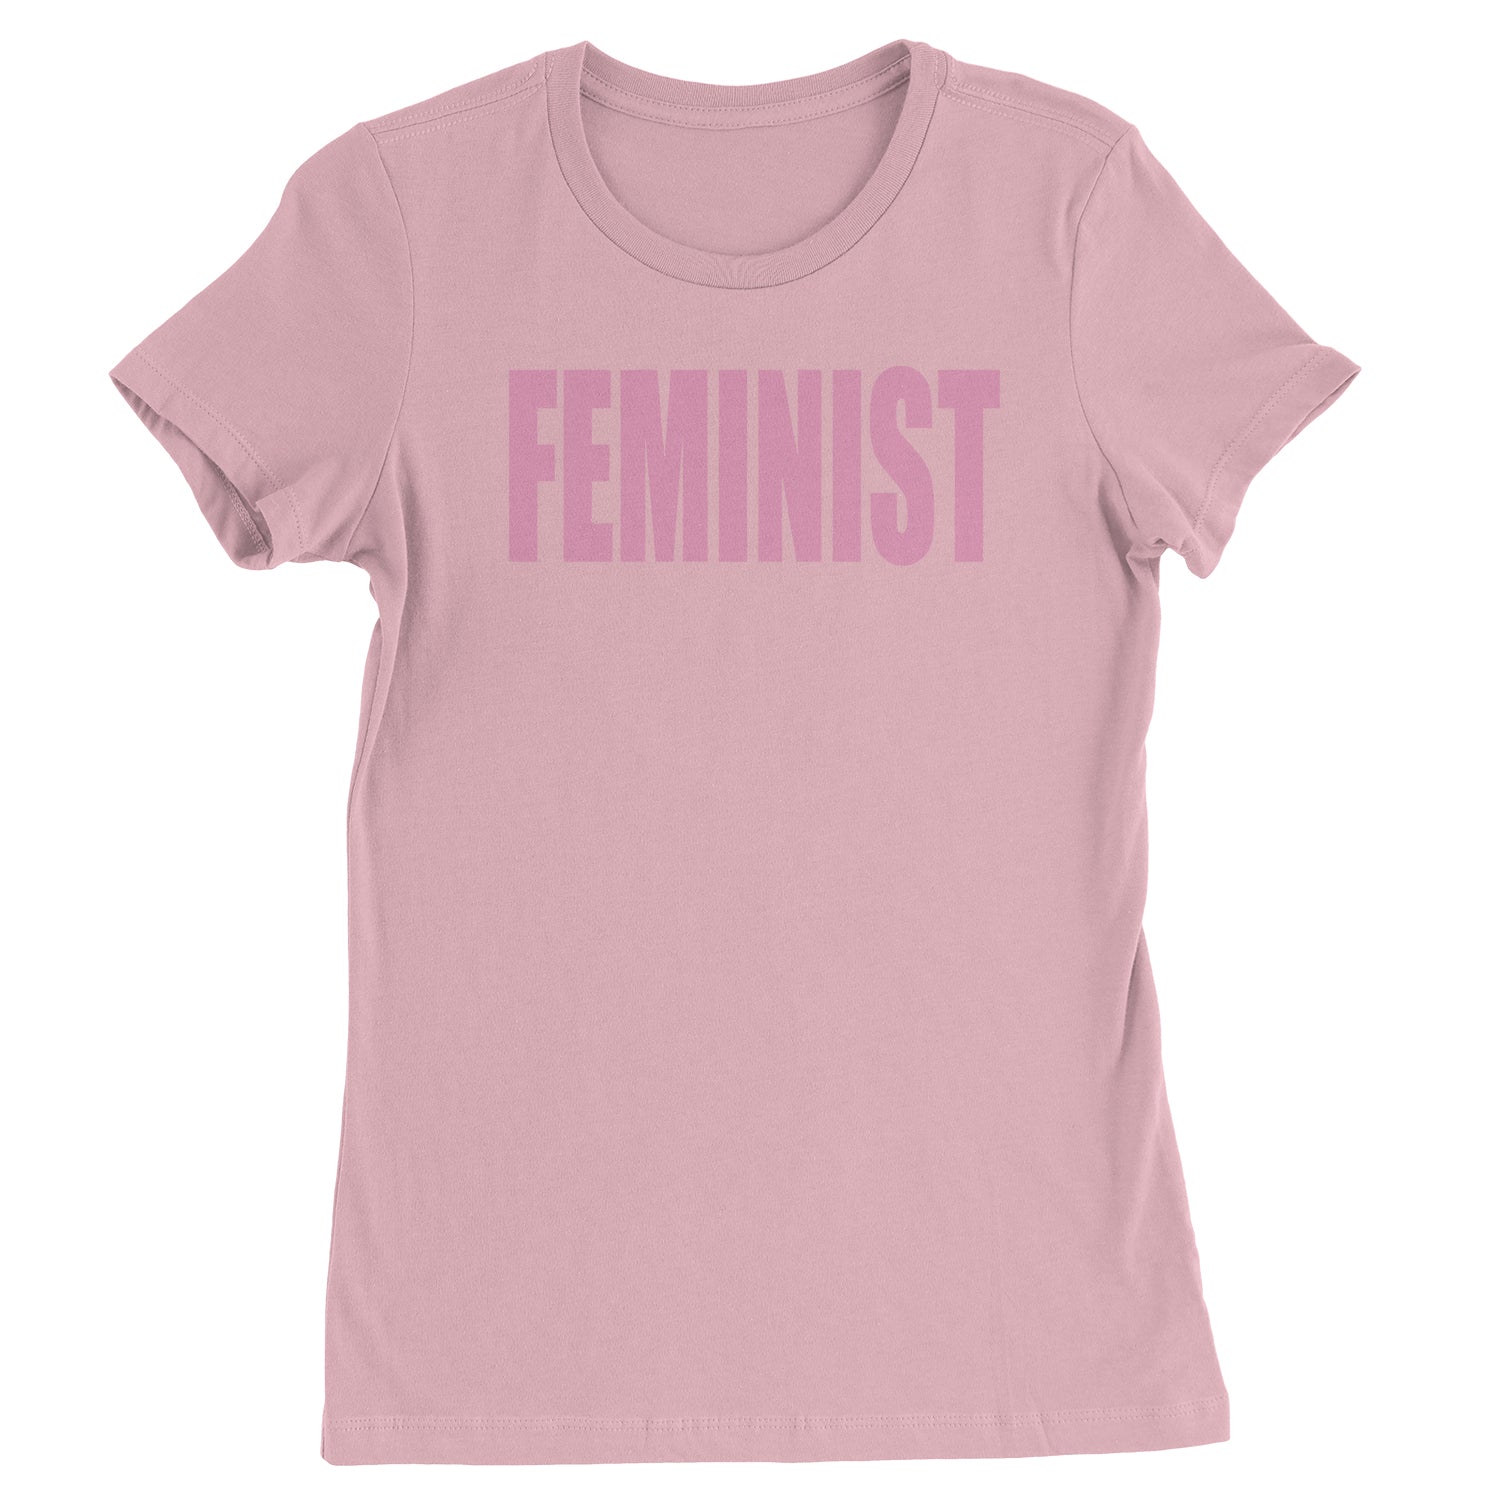 Feminist (Pink Print) Womens T-shirt a, equal, equality, feminism, feminist, gender, is, lgbtq, like, looks, nevertheless, pay, persisted, rights, she, this, what by Expression Tees